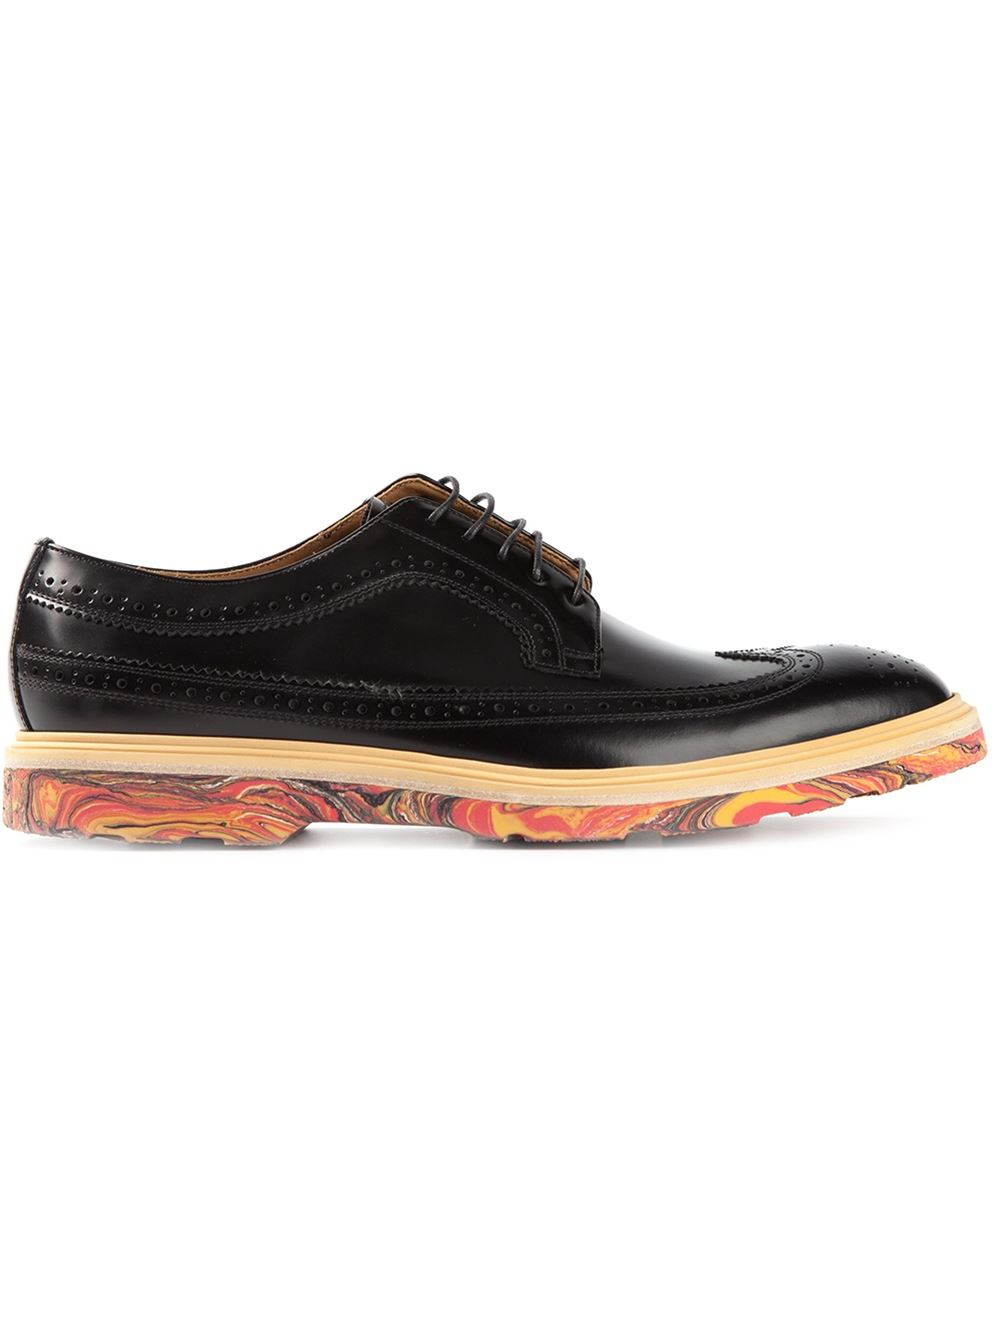 Paul Smith Grand Brogues in Black for Men - Lyst